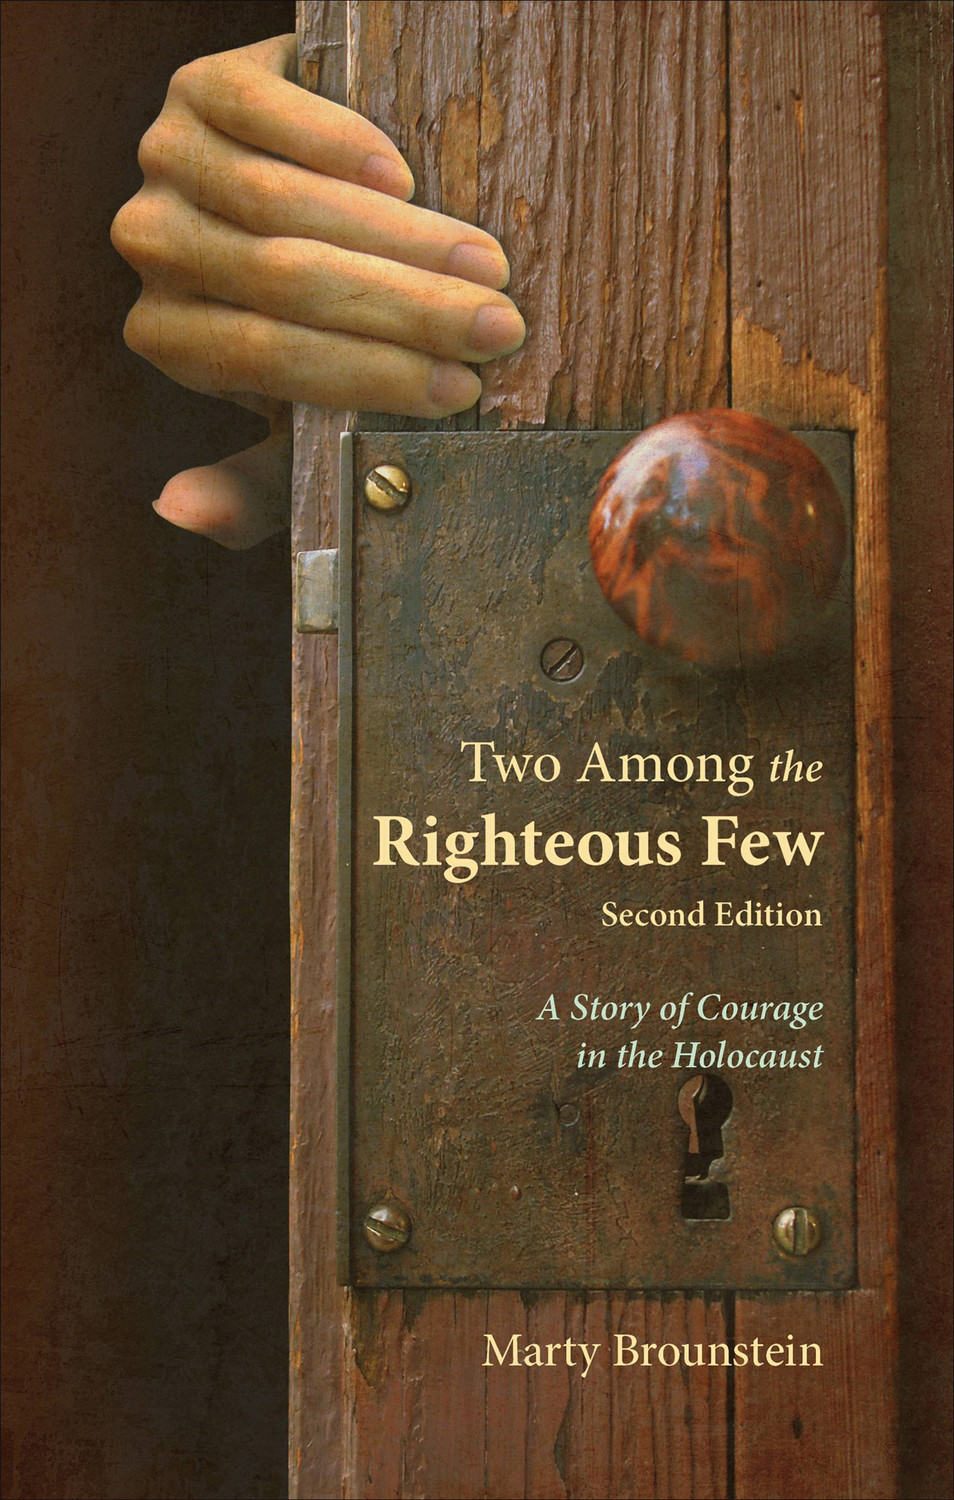 This is the cover of “Two Among the Righteous Few: A Story of Courage in the Holocaust” by Marty Brounstein.